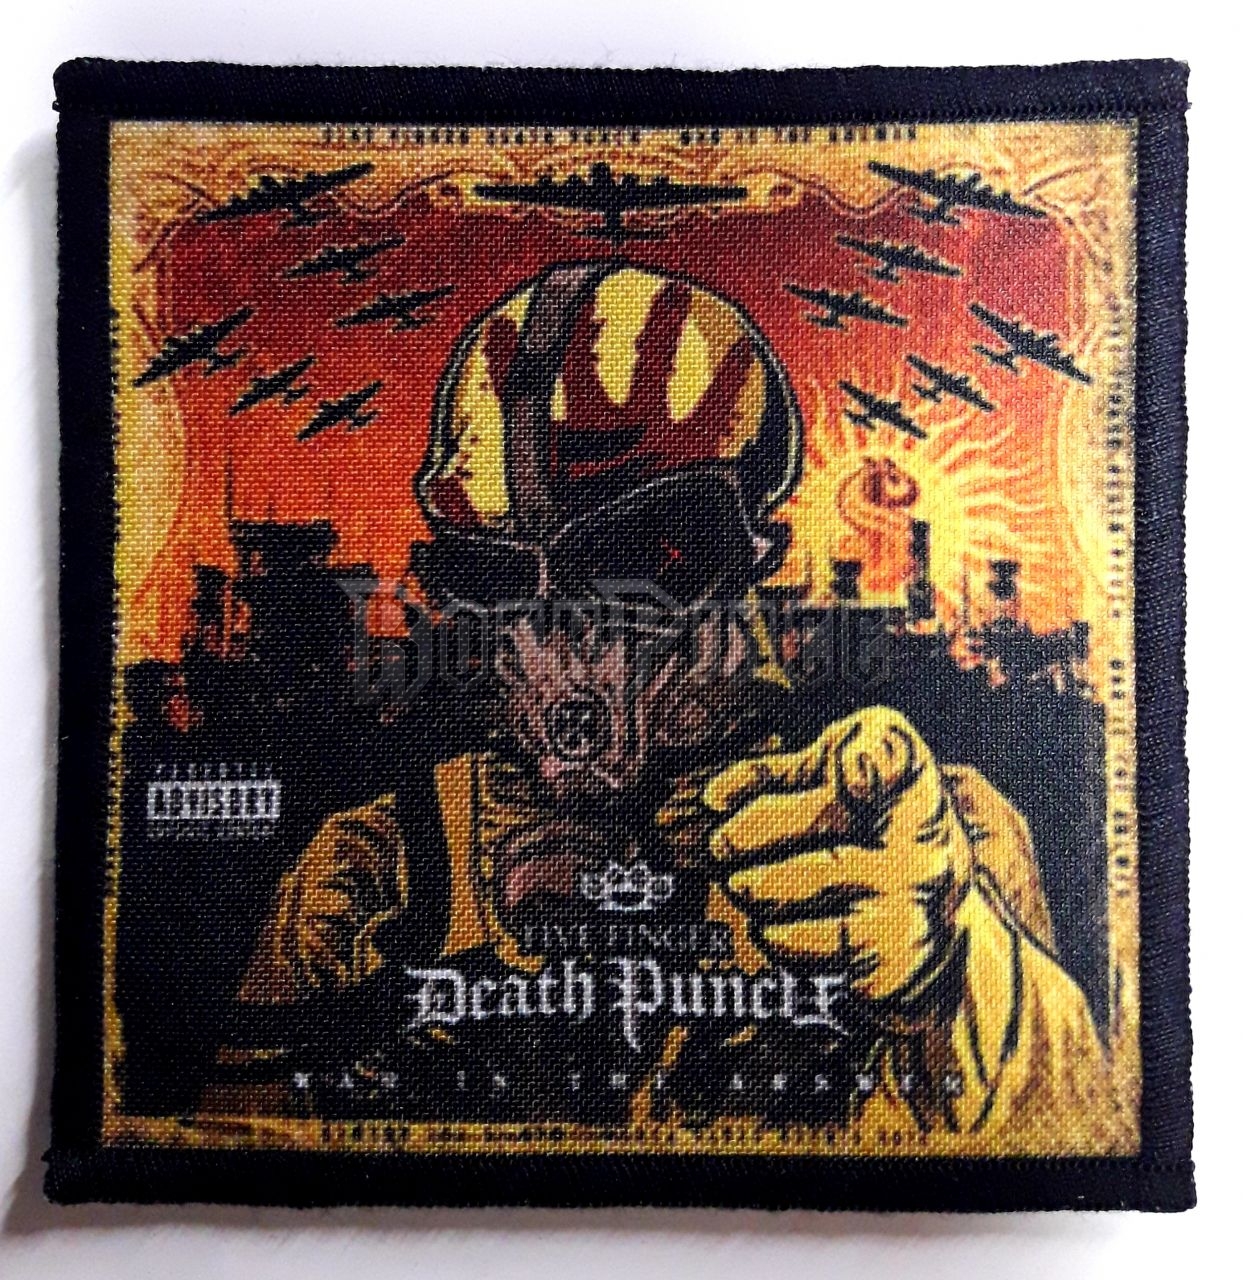 FIVE FINGER DEATH PUNCH - War Is the Answer - kisfelvarró